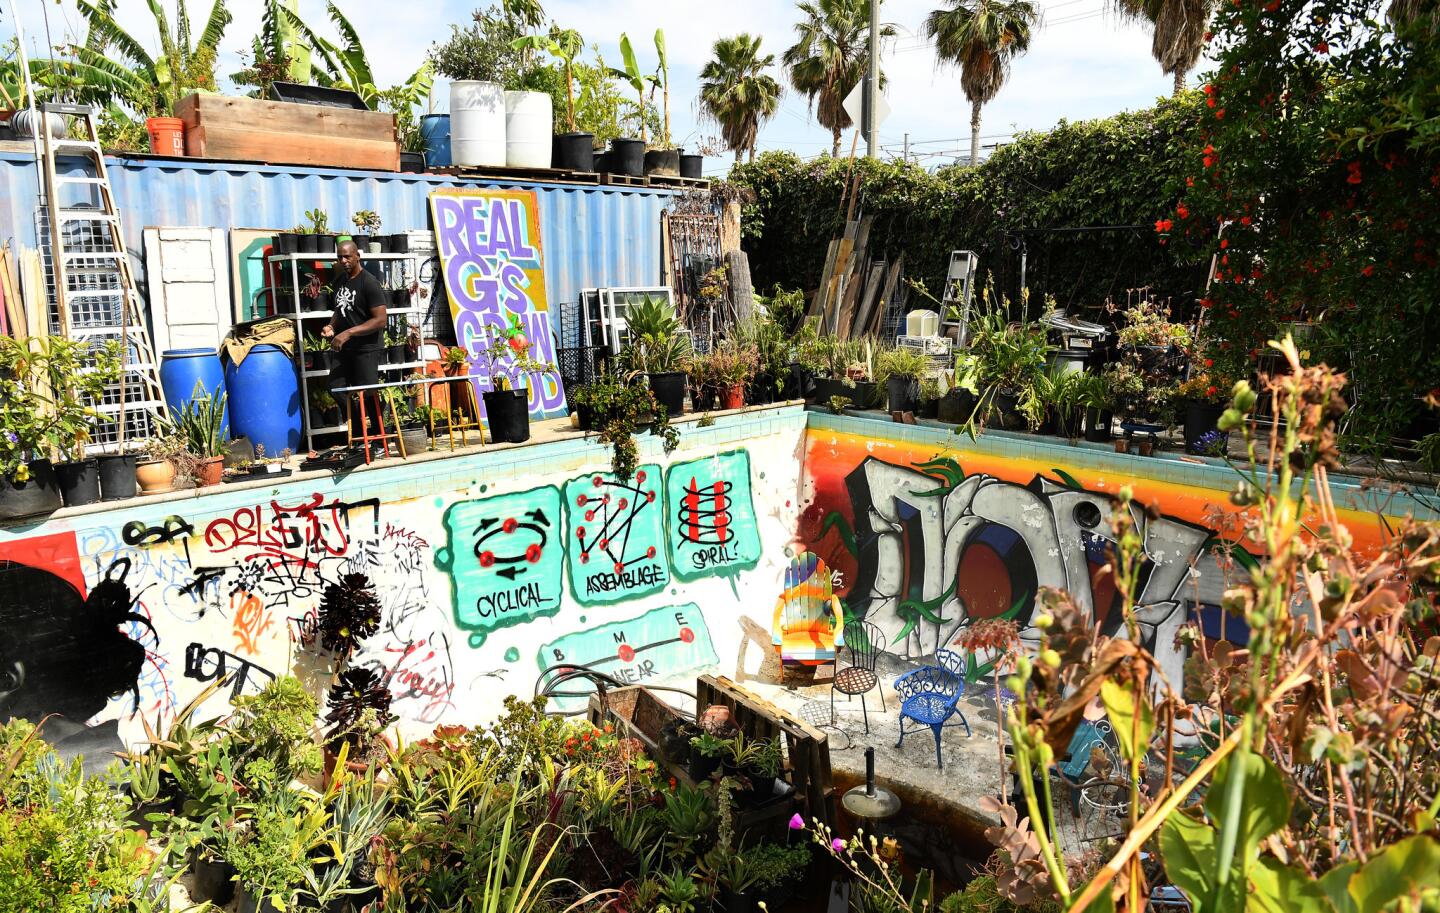 The backyard includes an Olympic-sized swimming pool full of plants and murals by one of Finley's so